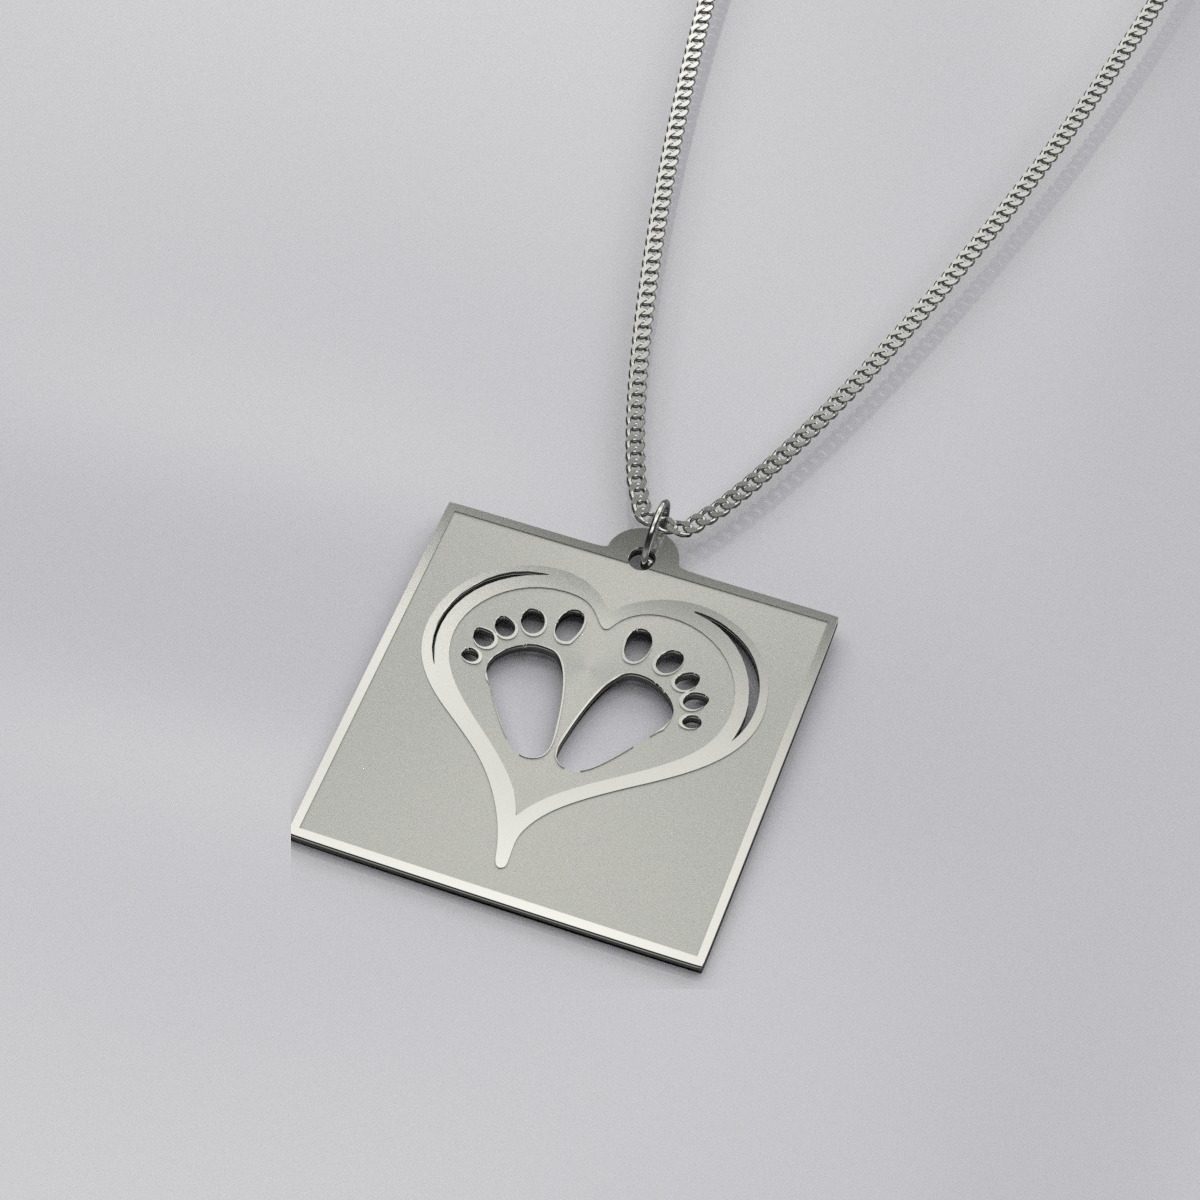 Engraved Baby Footprint Charm Necklace